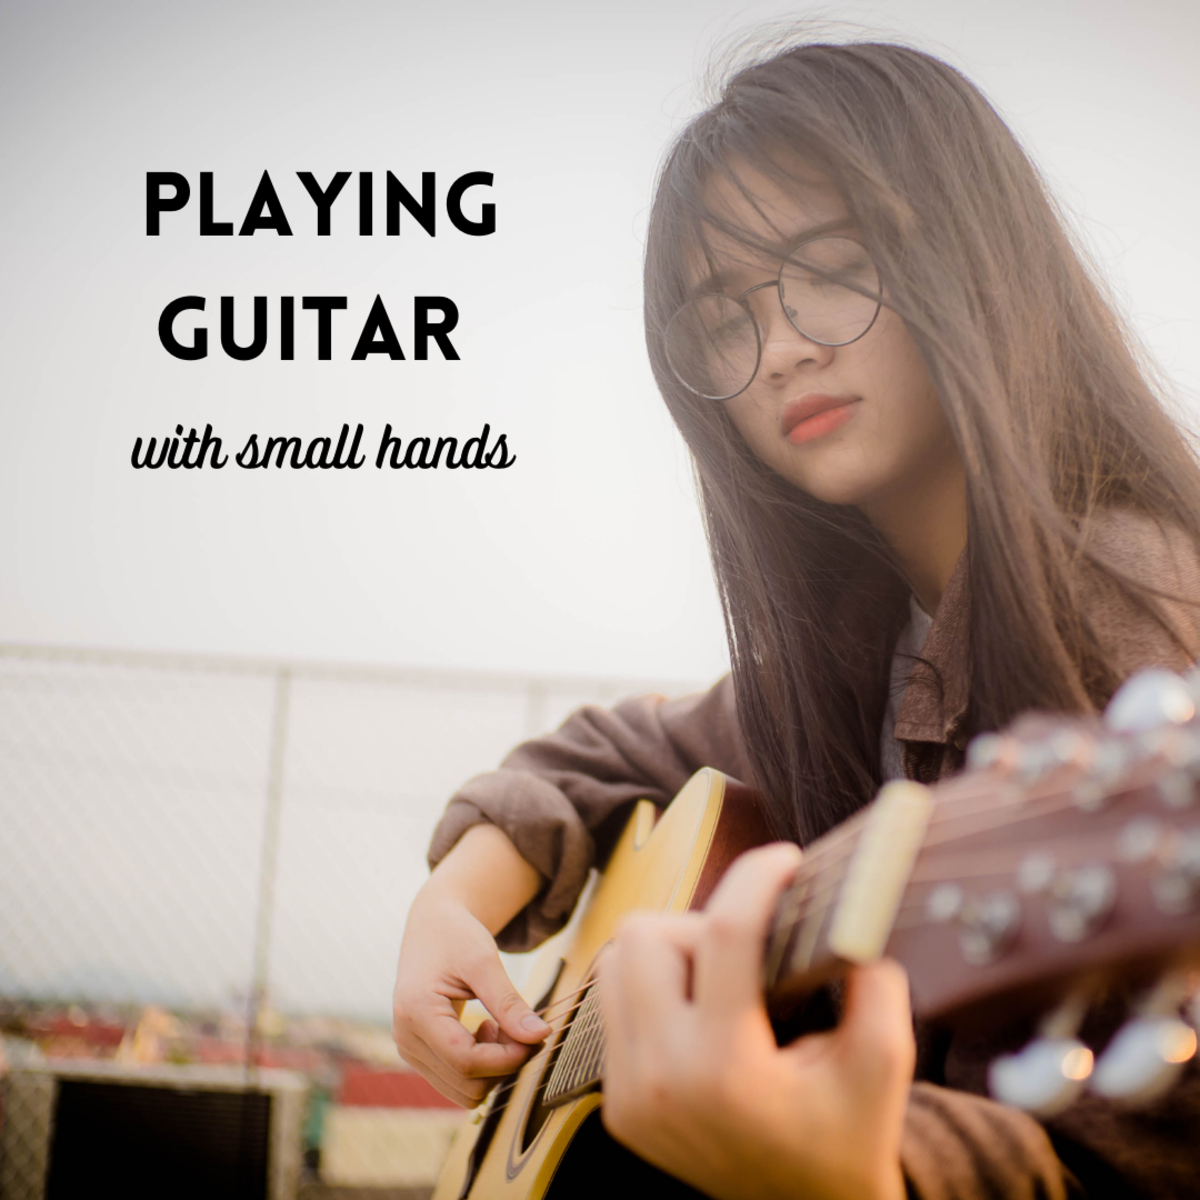 Improve your guitar practice routine with these eight tips on playing guitar with small hands.